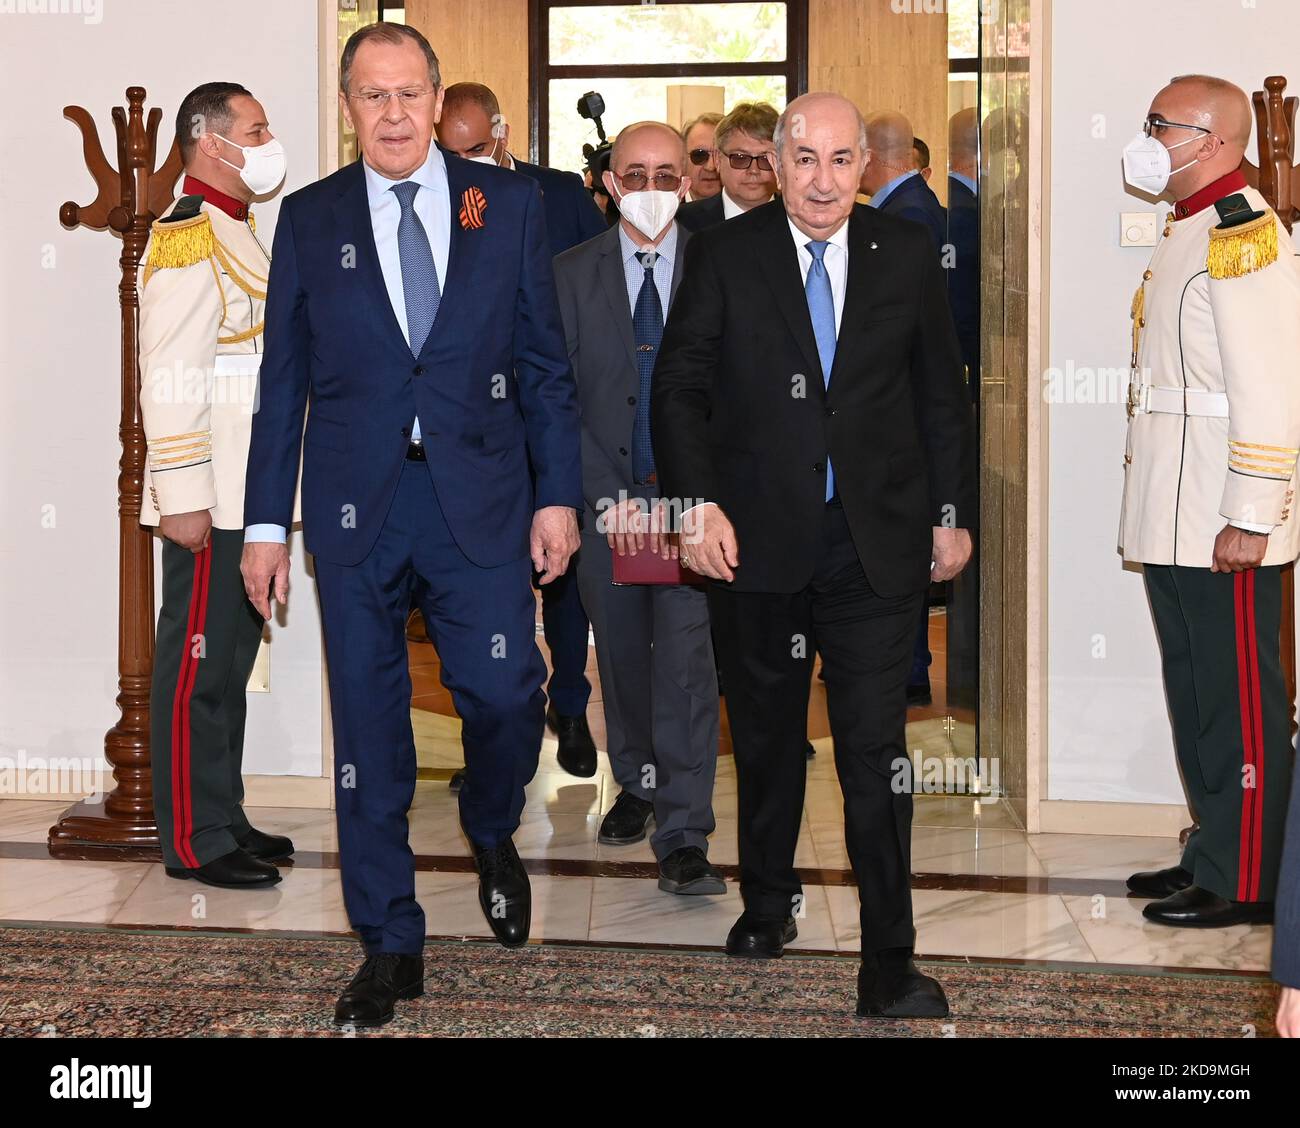 A photo of the publication published by the press service of the Algerian presidency shows that Algerian President Abdelmadjid Tebboune (right) meets Russian Foreign Minister Sergey Lavrov (left) at El Mouradia Palace in Algiers, Algeria on May 10, 2022. Russian Foreign Minister Sergei Lavrov is on an official visit to Algeria (Photo by APP/NurPhoto) Stock Photo